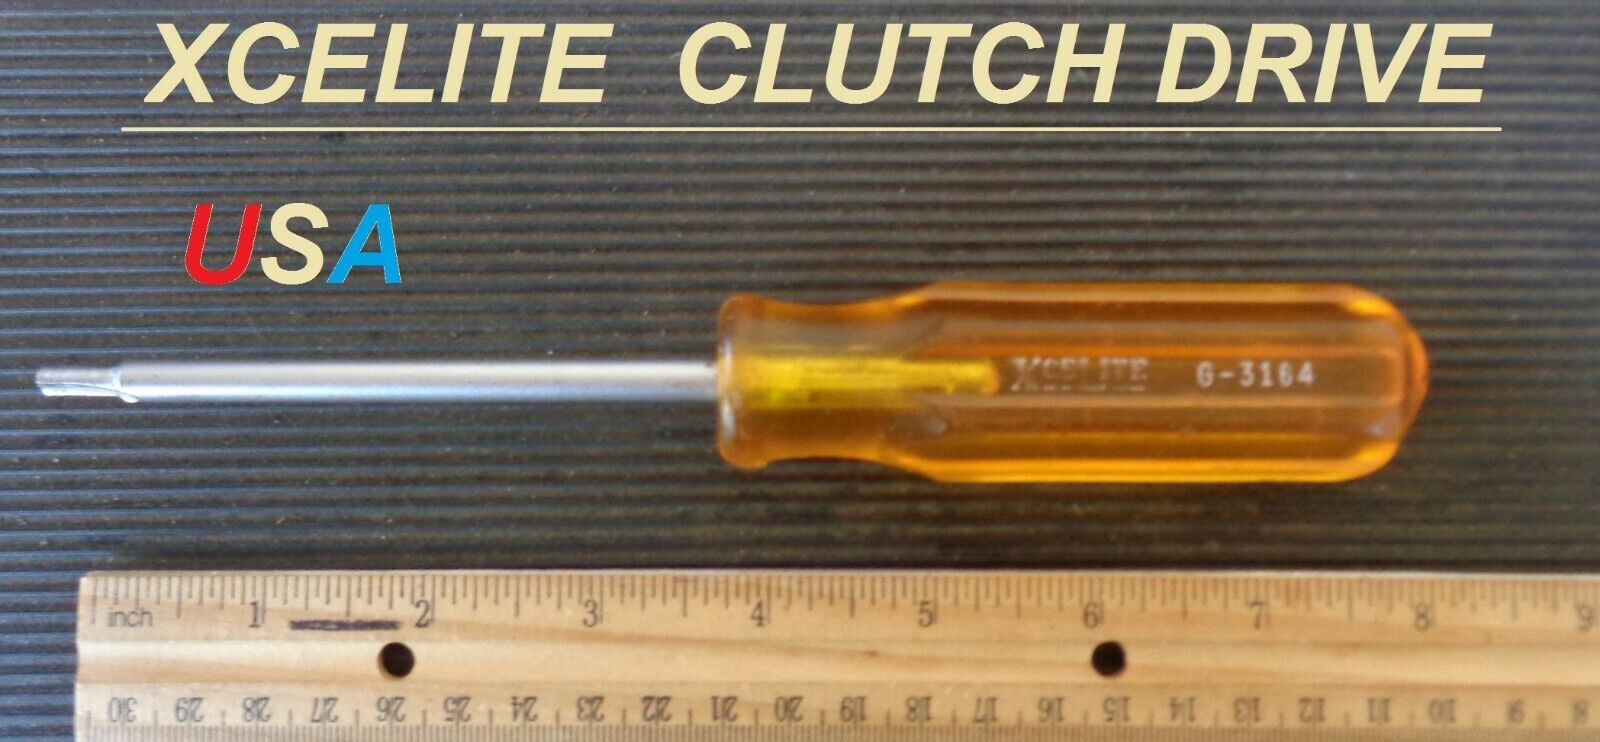 XCELITE 3/16 CLUTCH Drive Screwdriver - Part Number G3164 - Made in USA